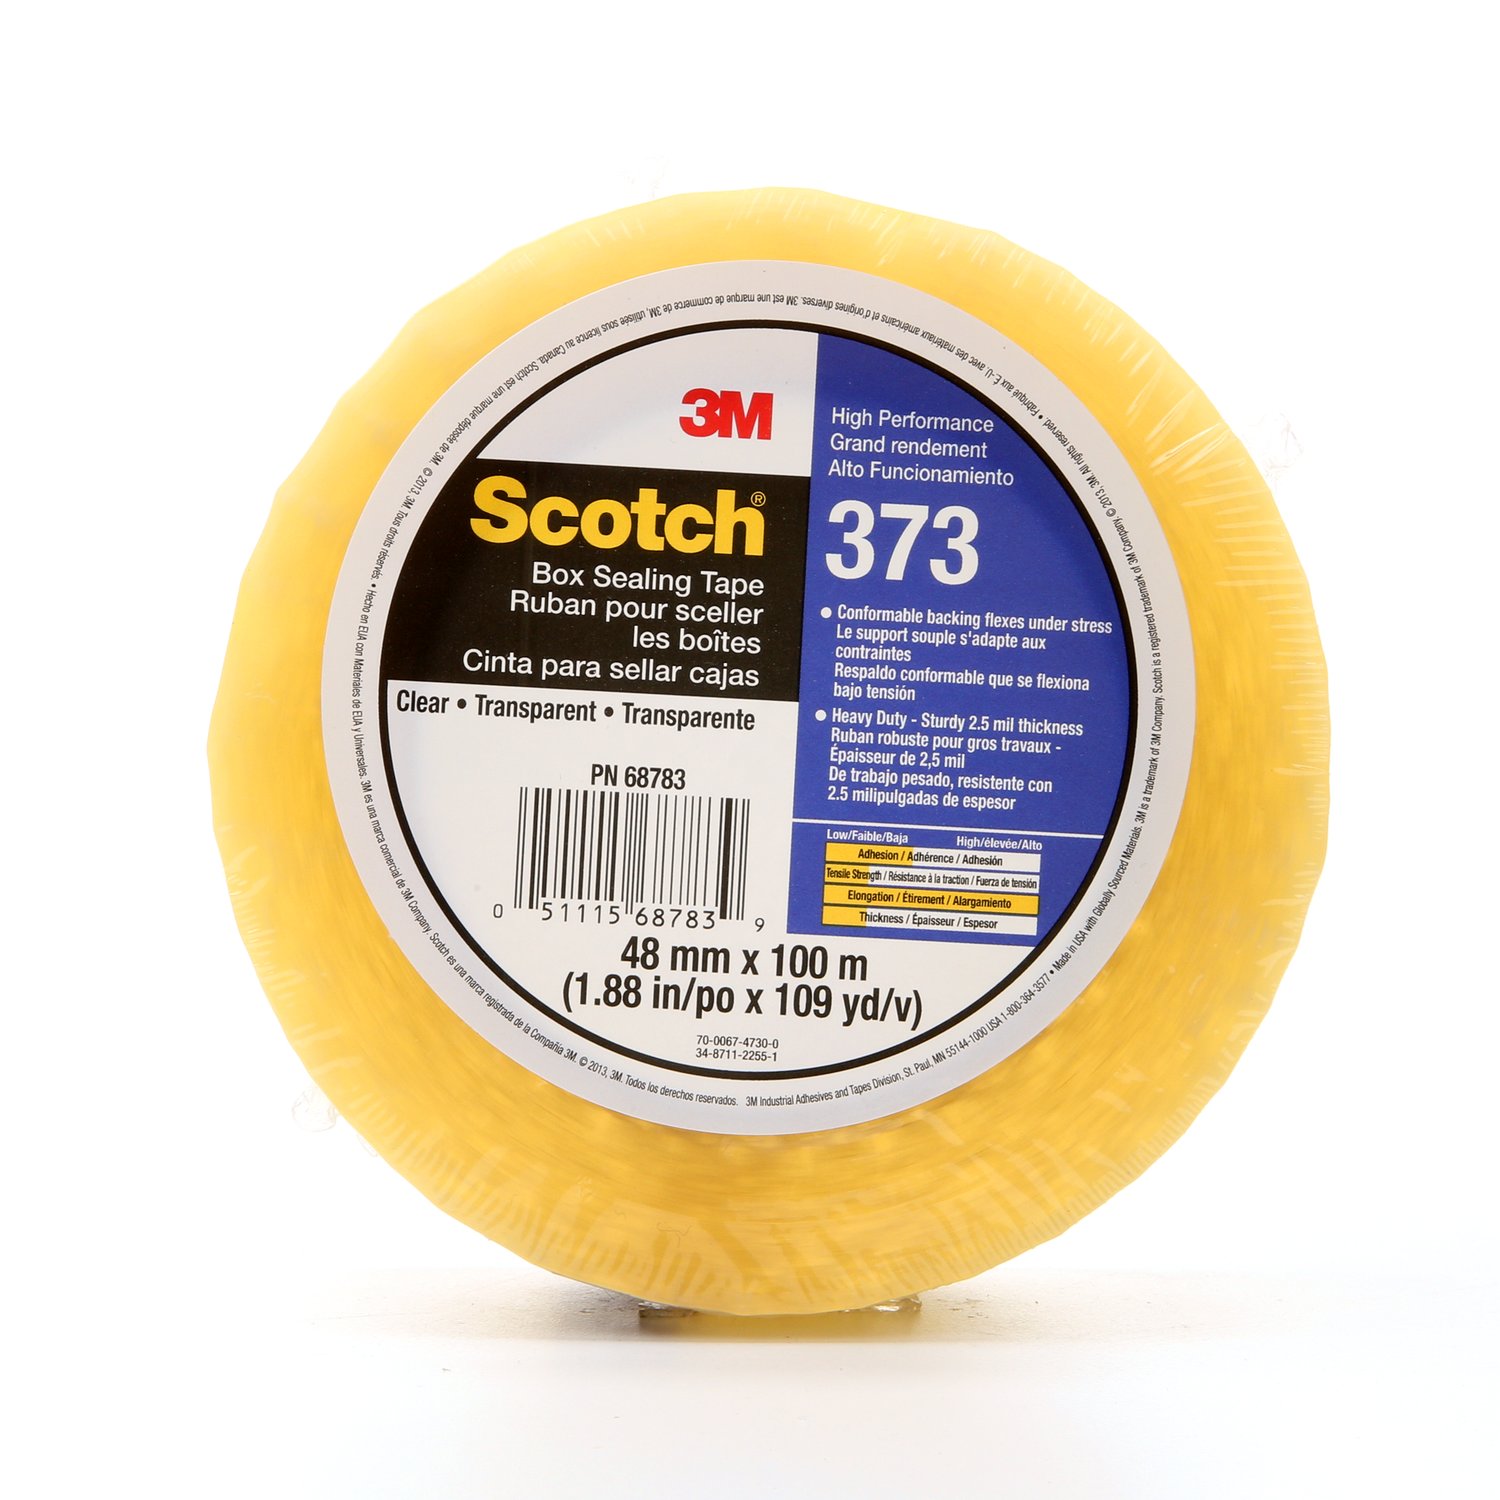 7010374966 - Scotch Box Sealing Tape 373, Clear, 48 mm x 100 m, 36/Case,
Individually Wrapped Conveniently Packaged